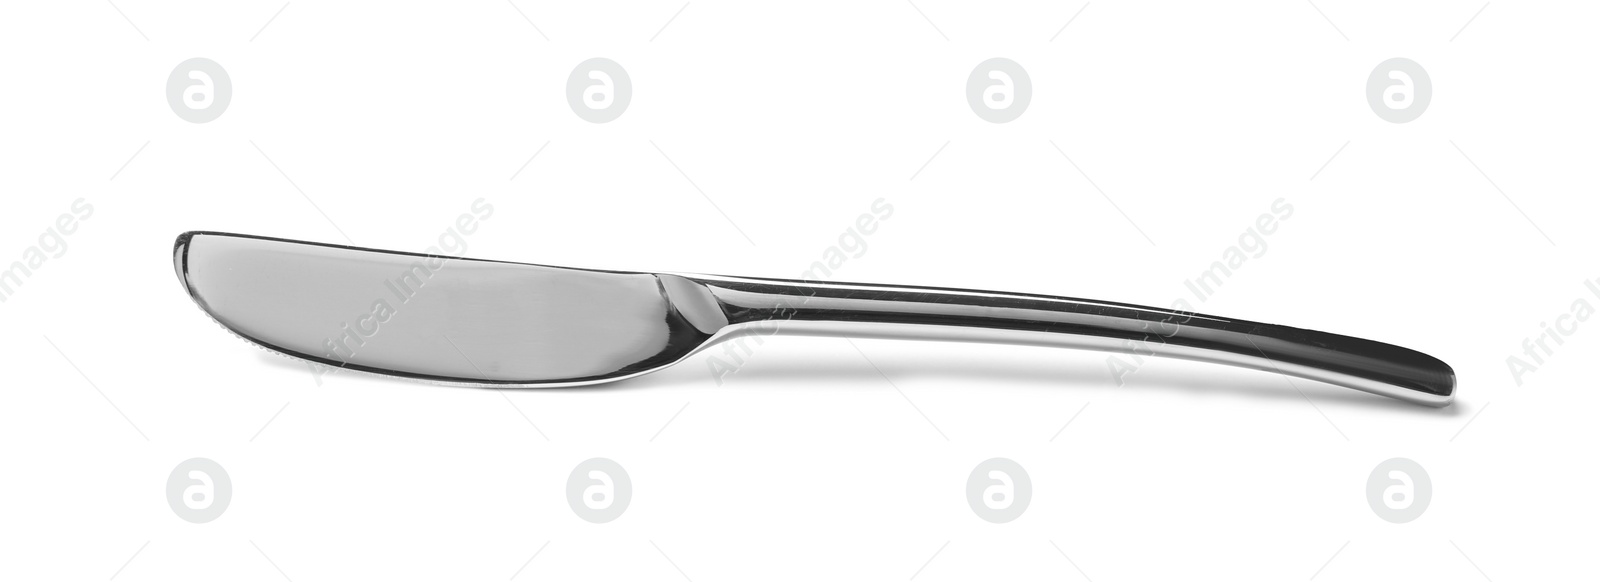 Photo of Stainless steel butter knife isolated on white